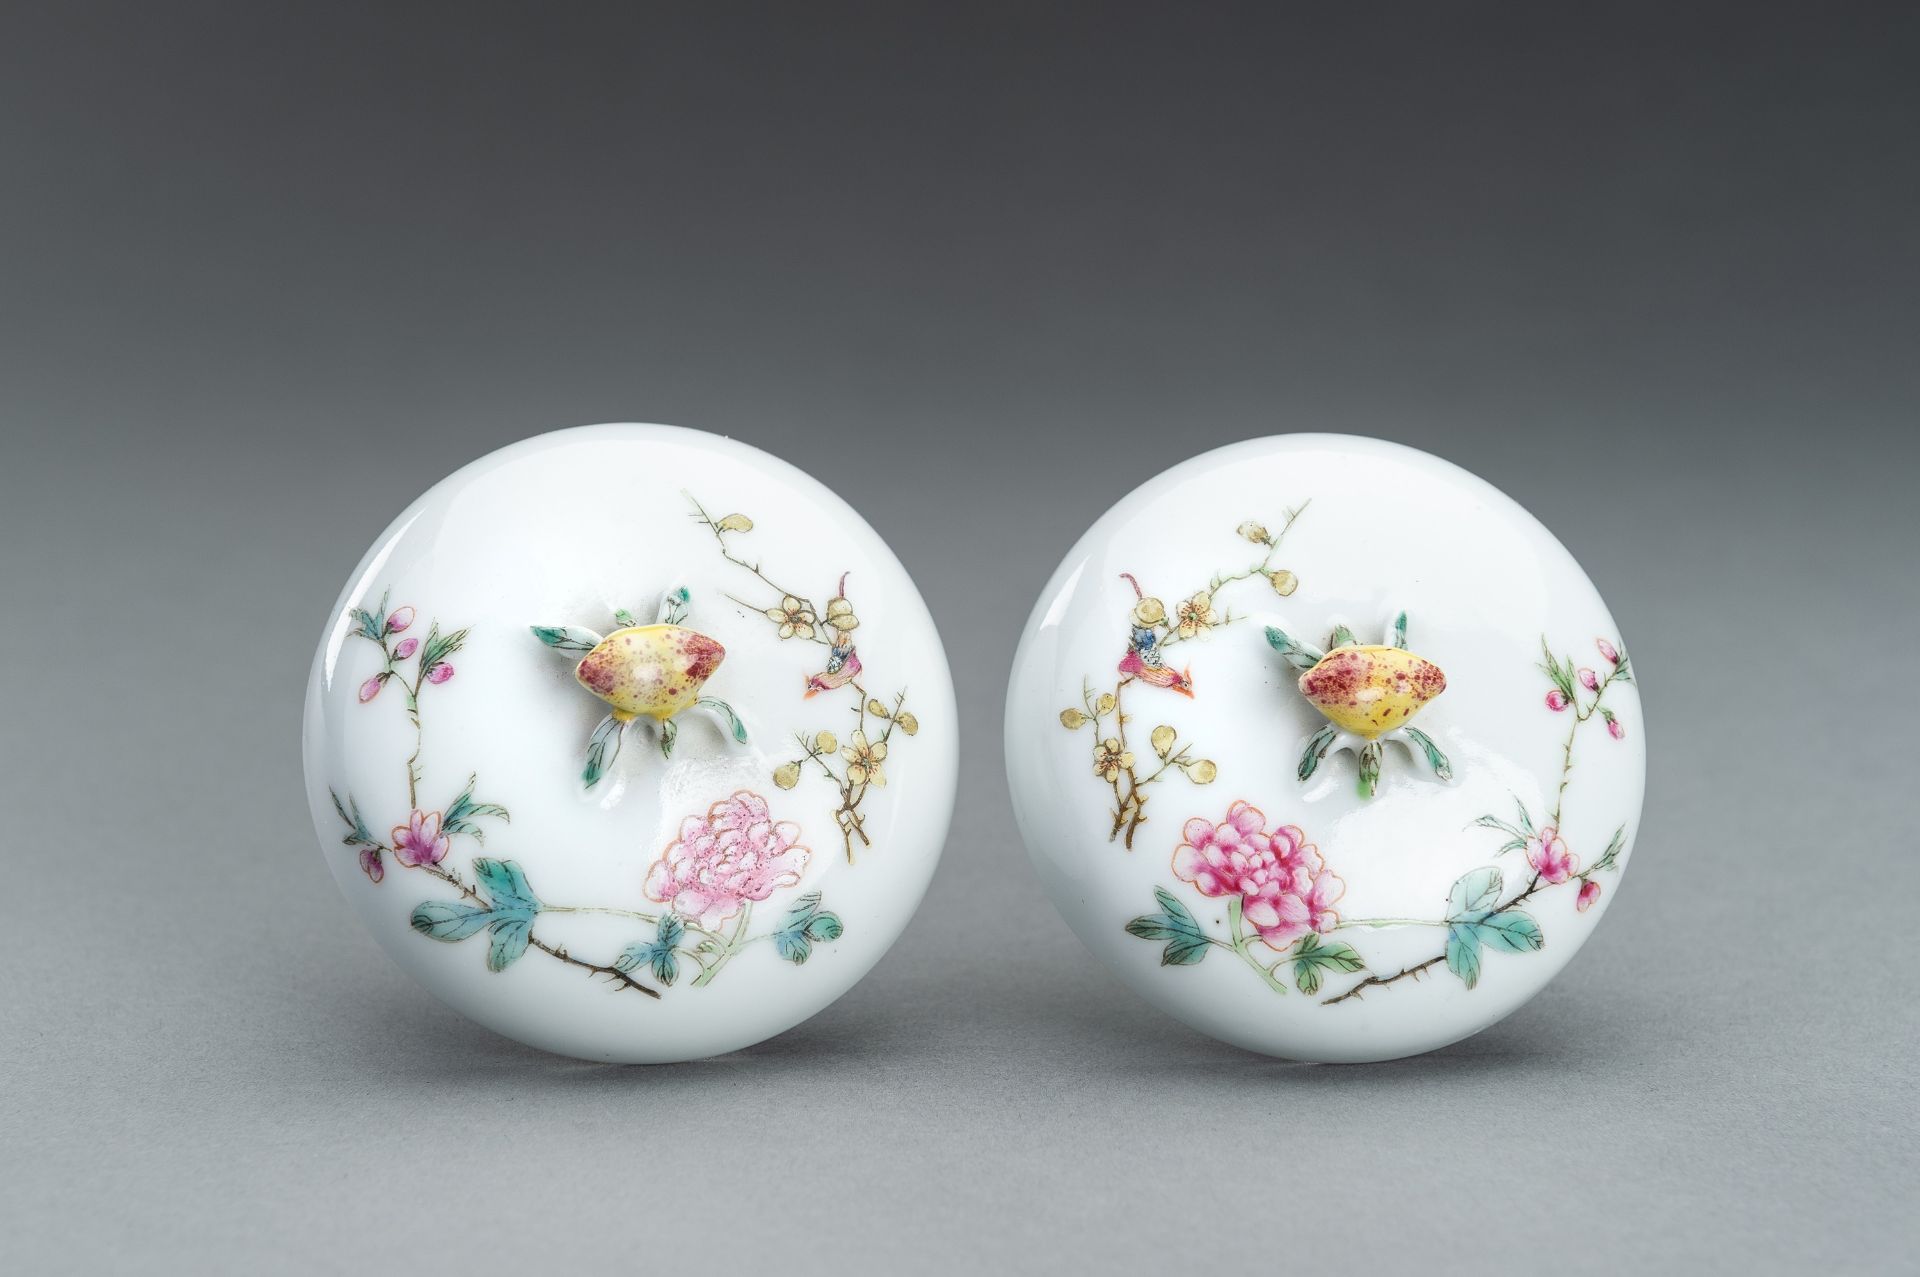 A SMALL PAIR OF ENAMELED BOWLS AND COVERS, GUANGXU MARK AND PERIOD - Image 7 of 12